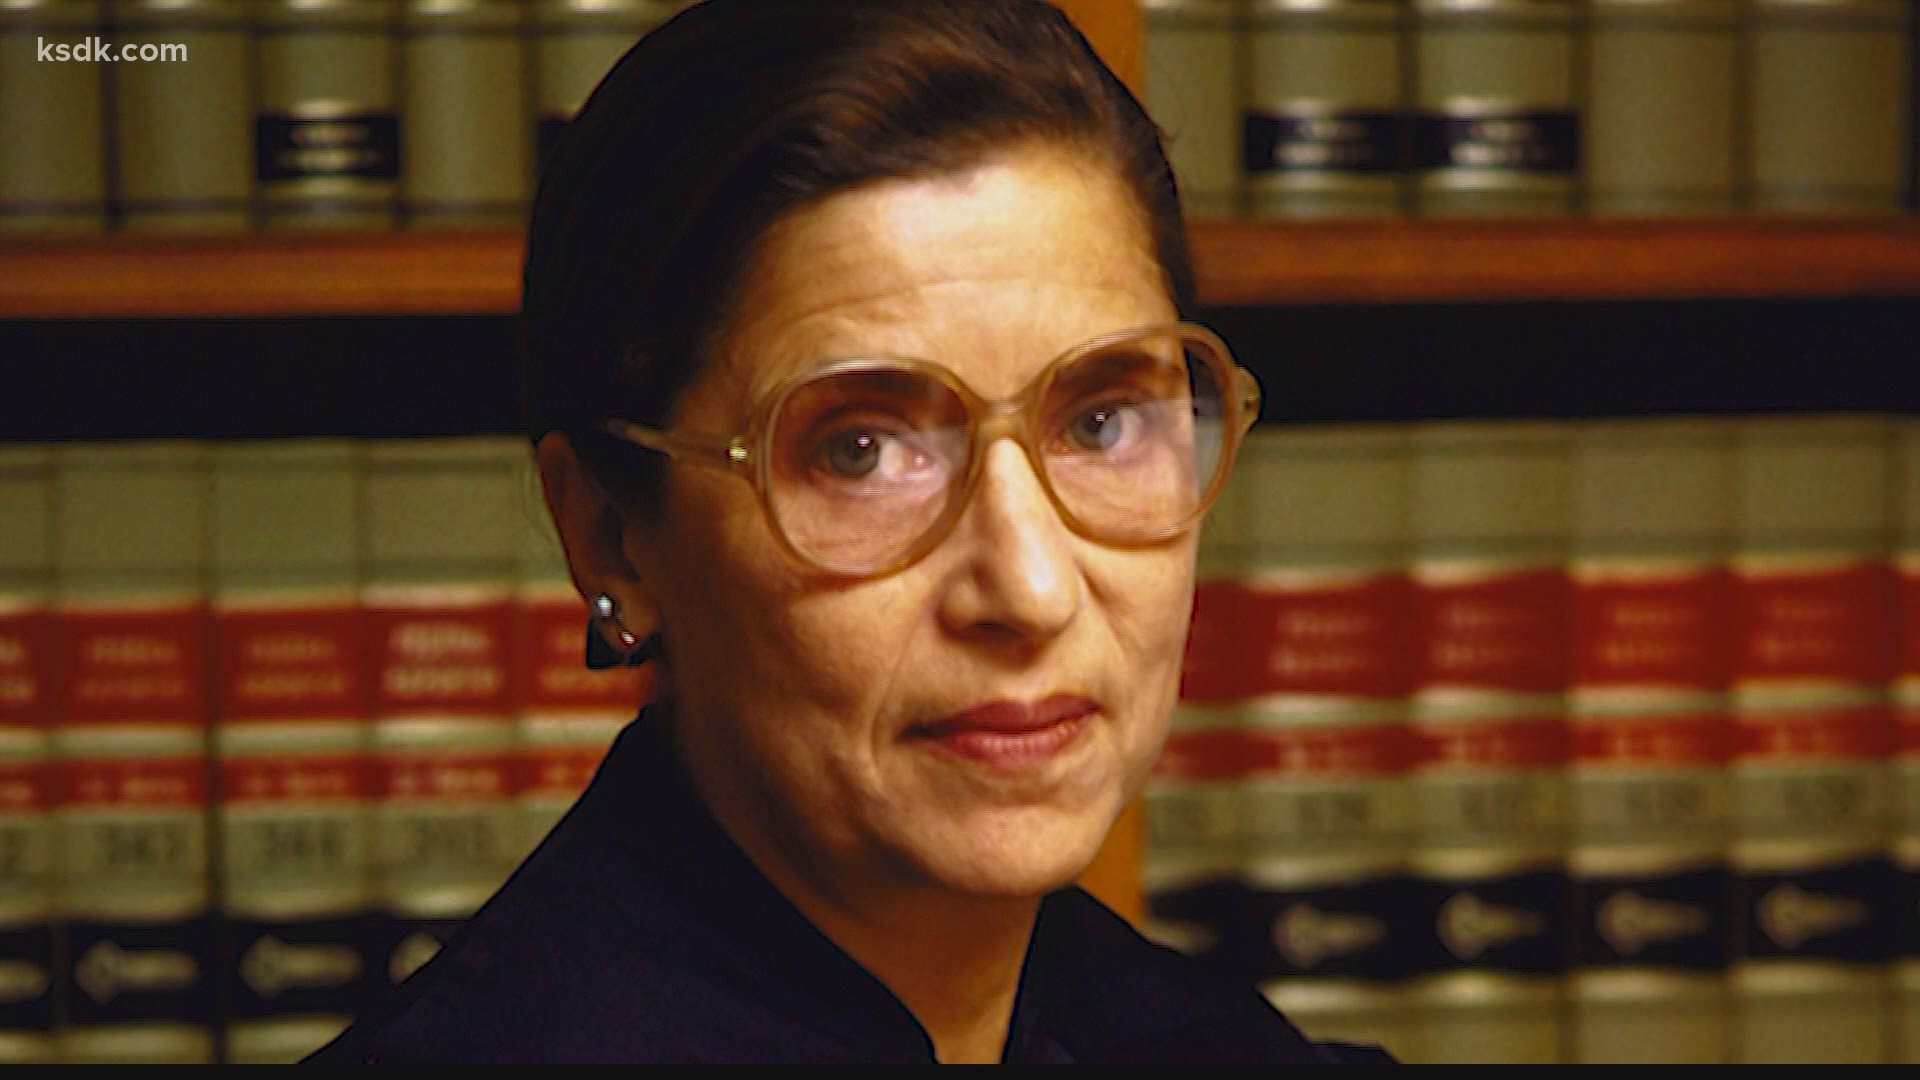 Justice Ginsburg died at the age of 87